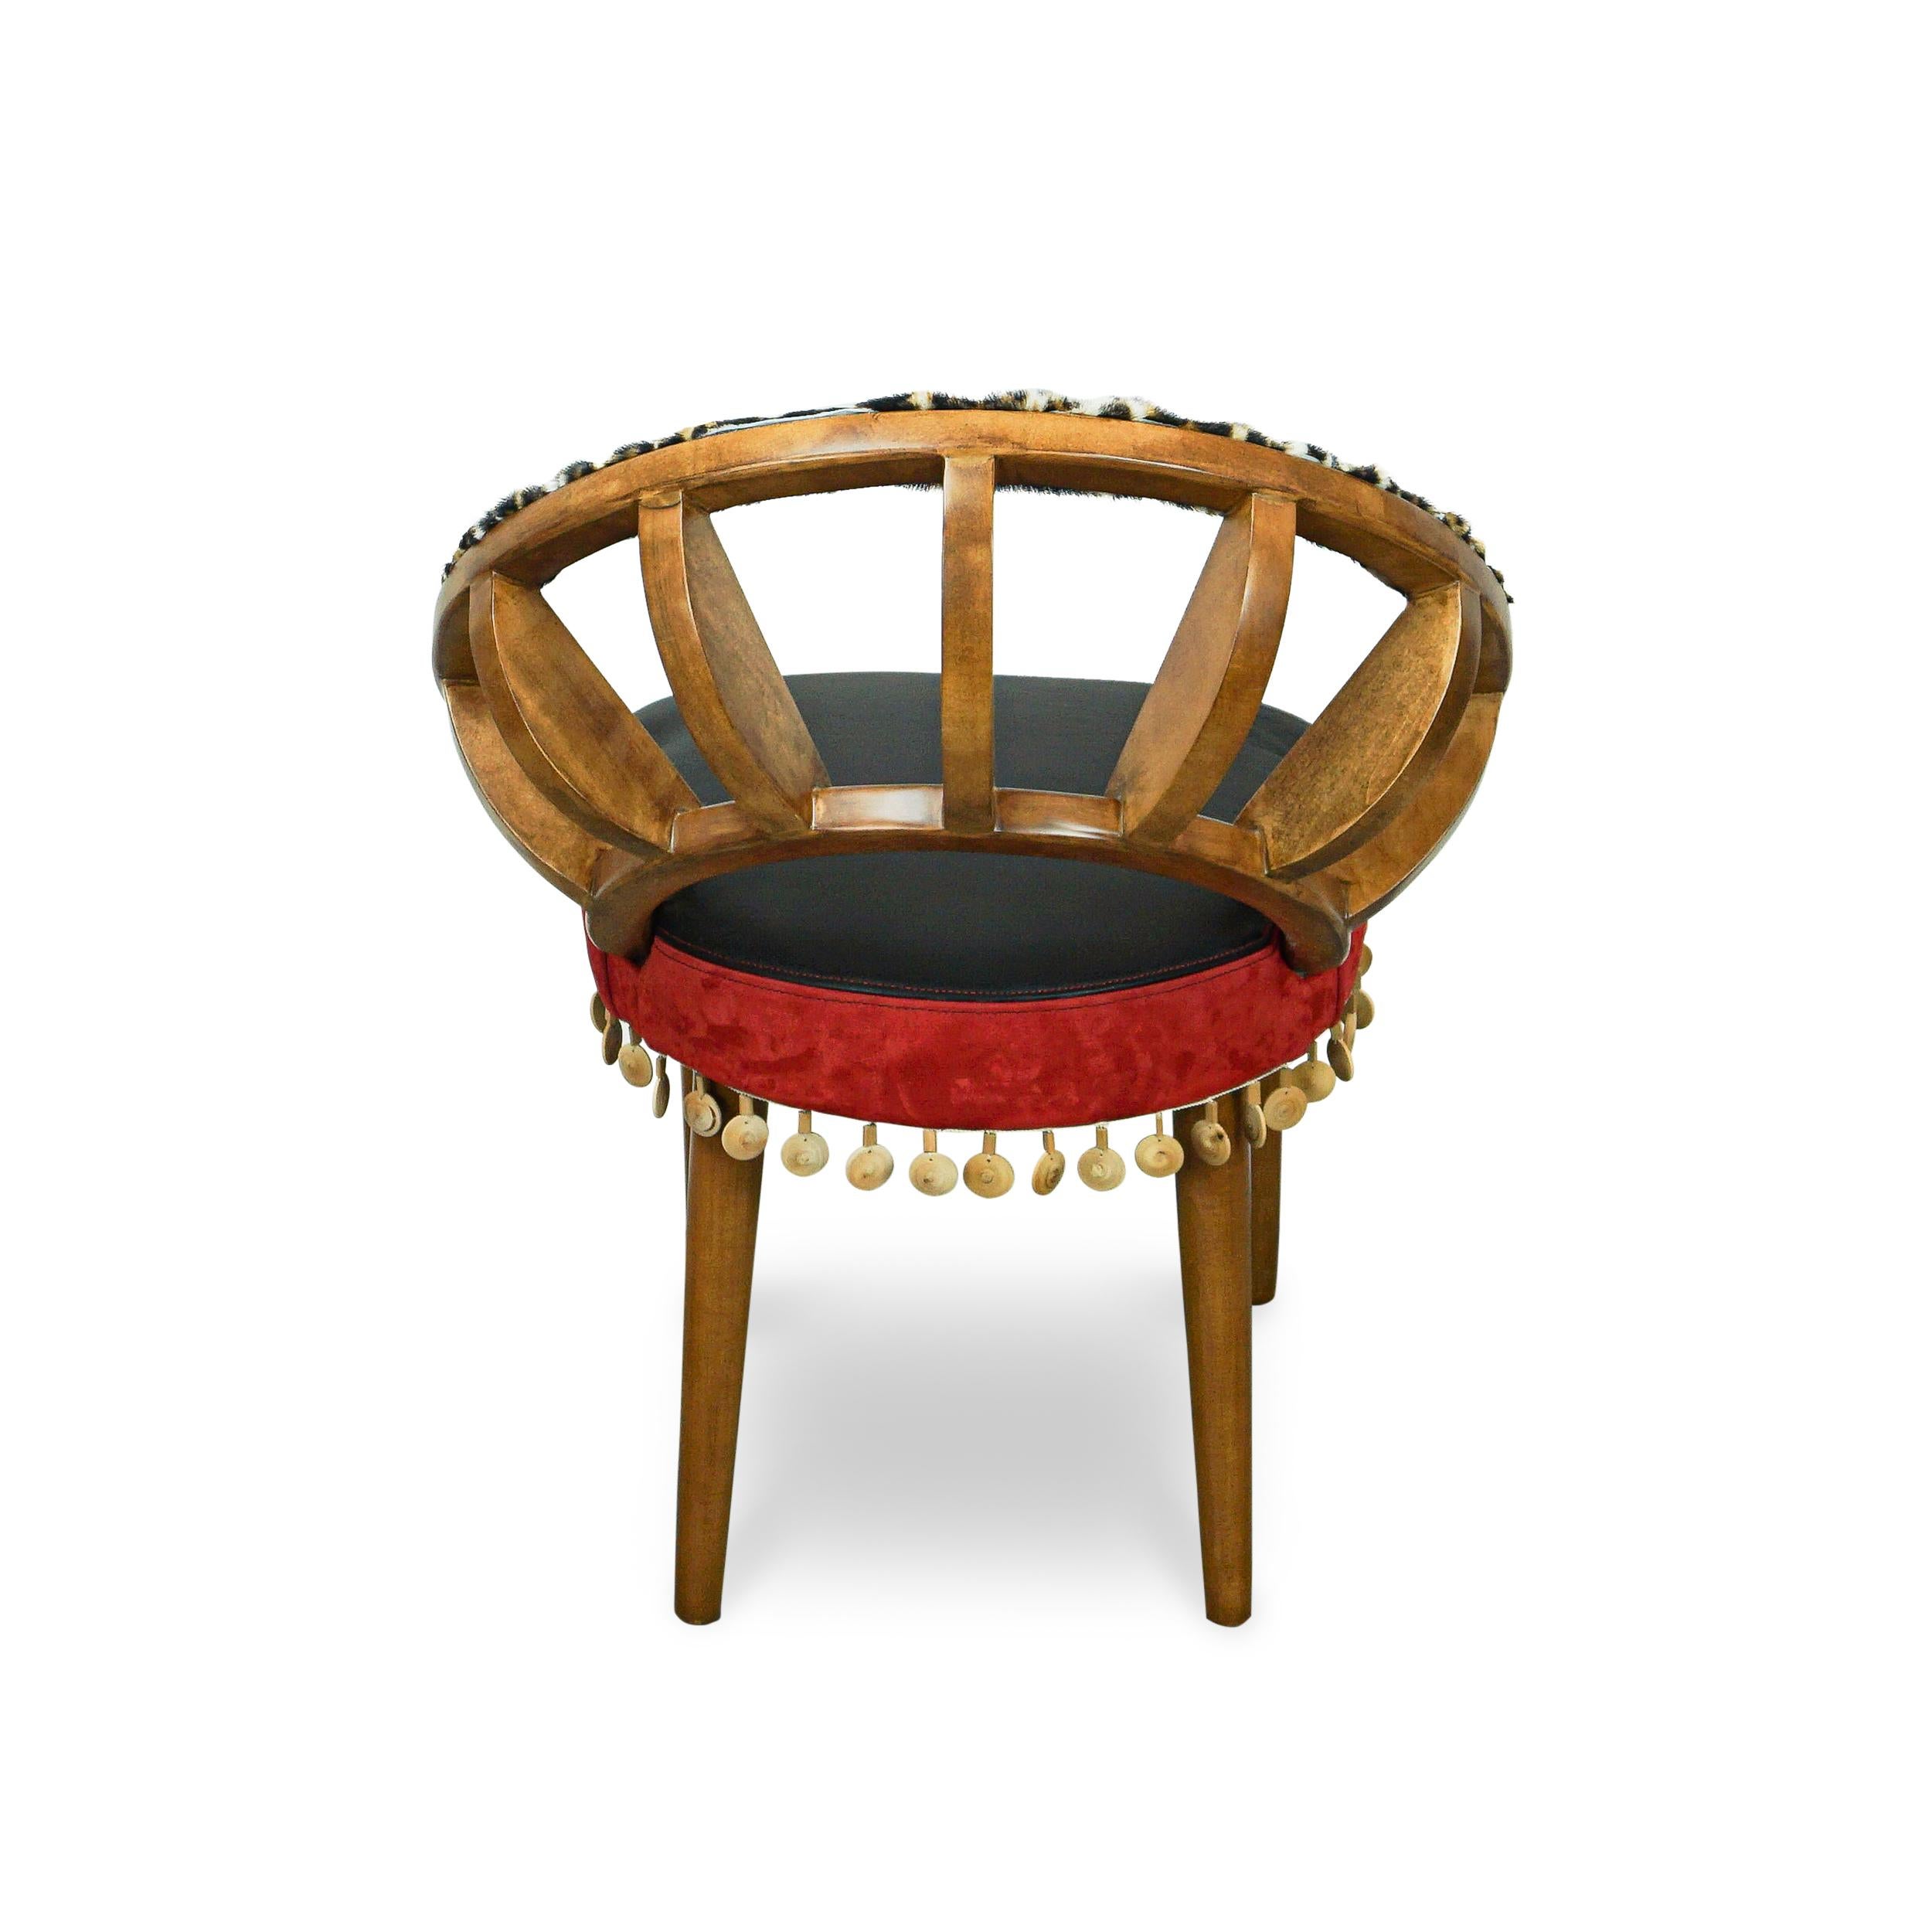 Ribbed Wood Chair with Cheetah Hair on Hide, Red + Black Leather and Wood Bead For Sale 2